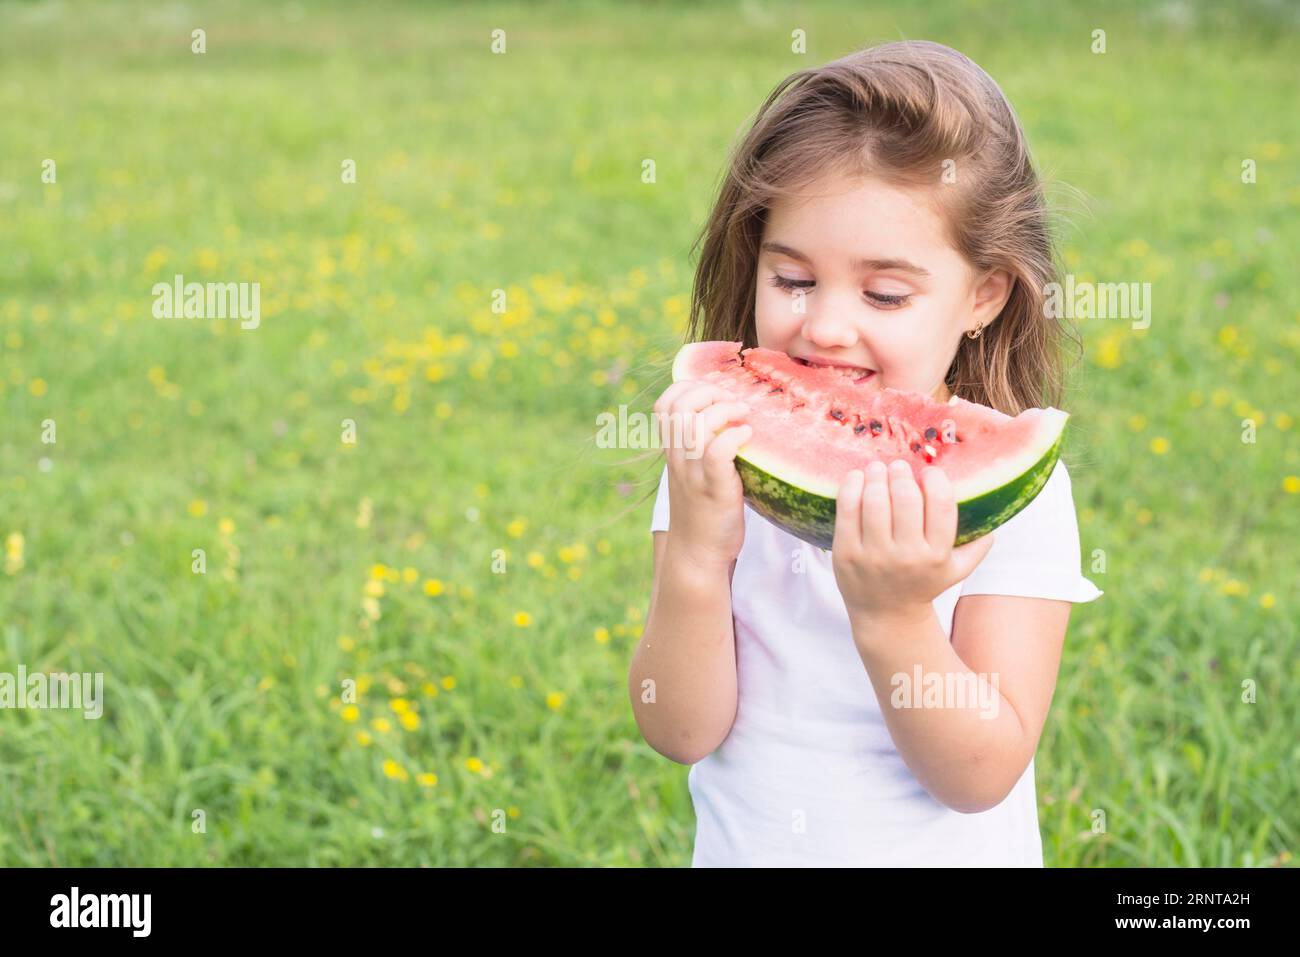 Little girl standing field eating red slice watermelon Stock Photo